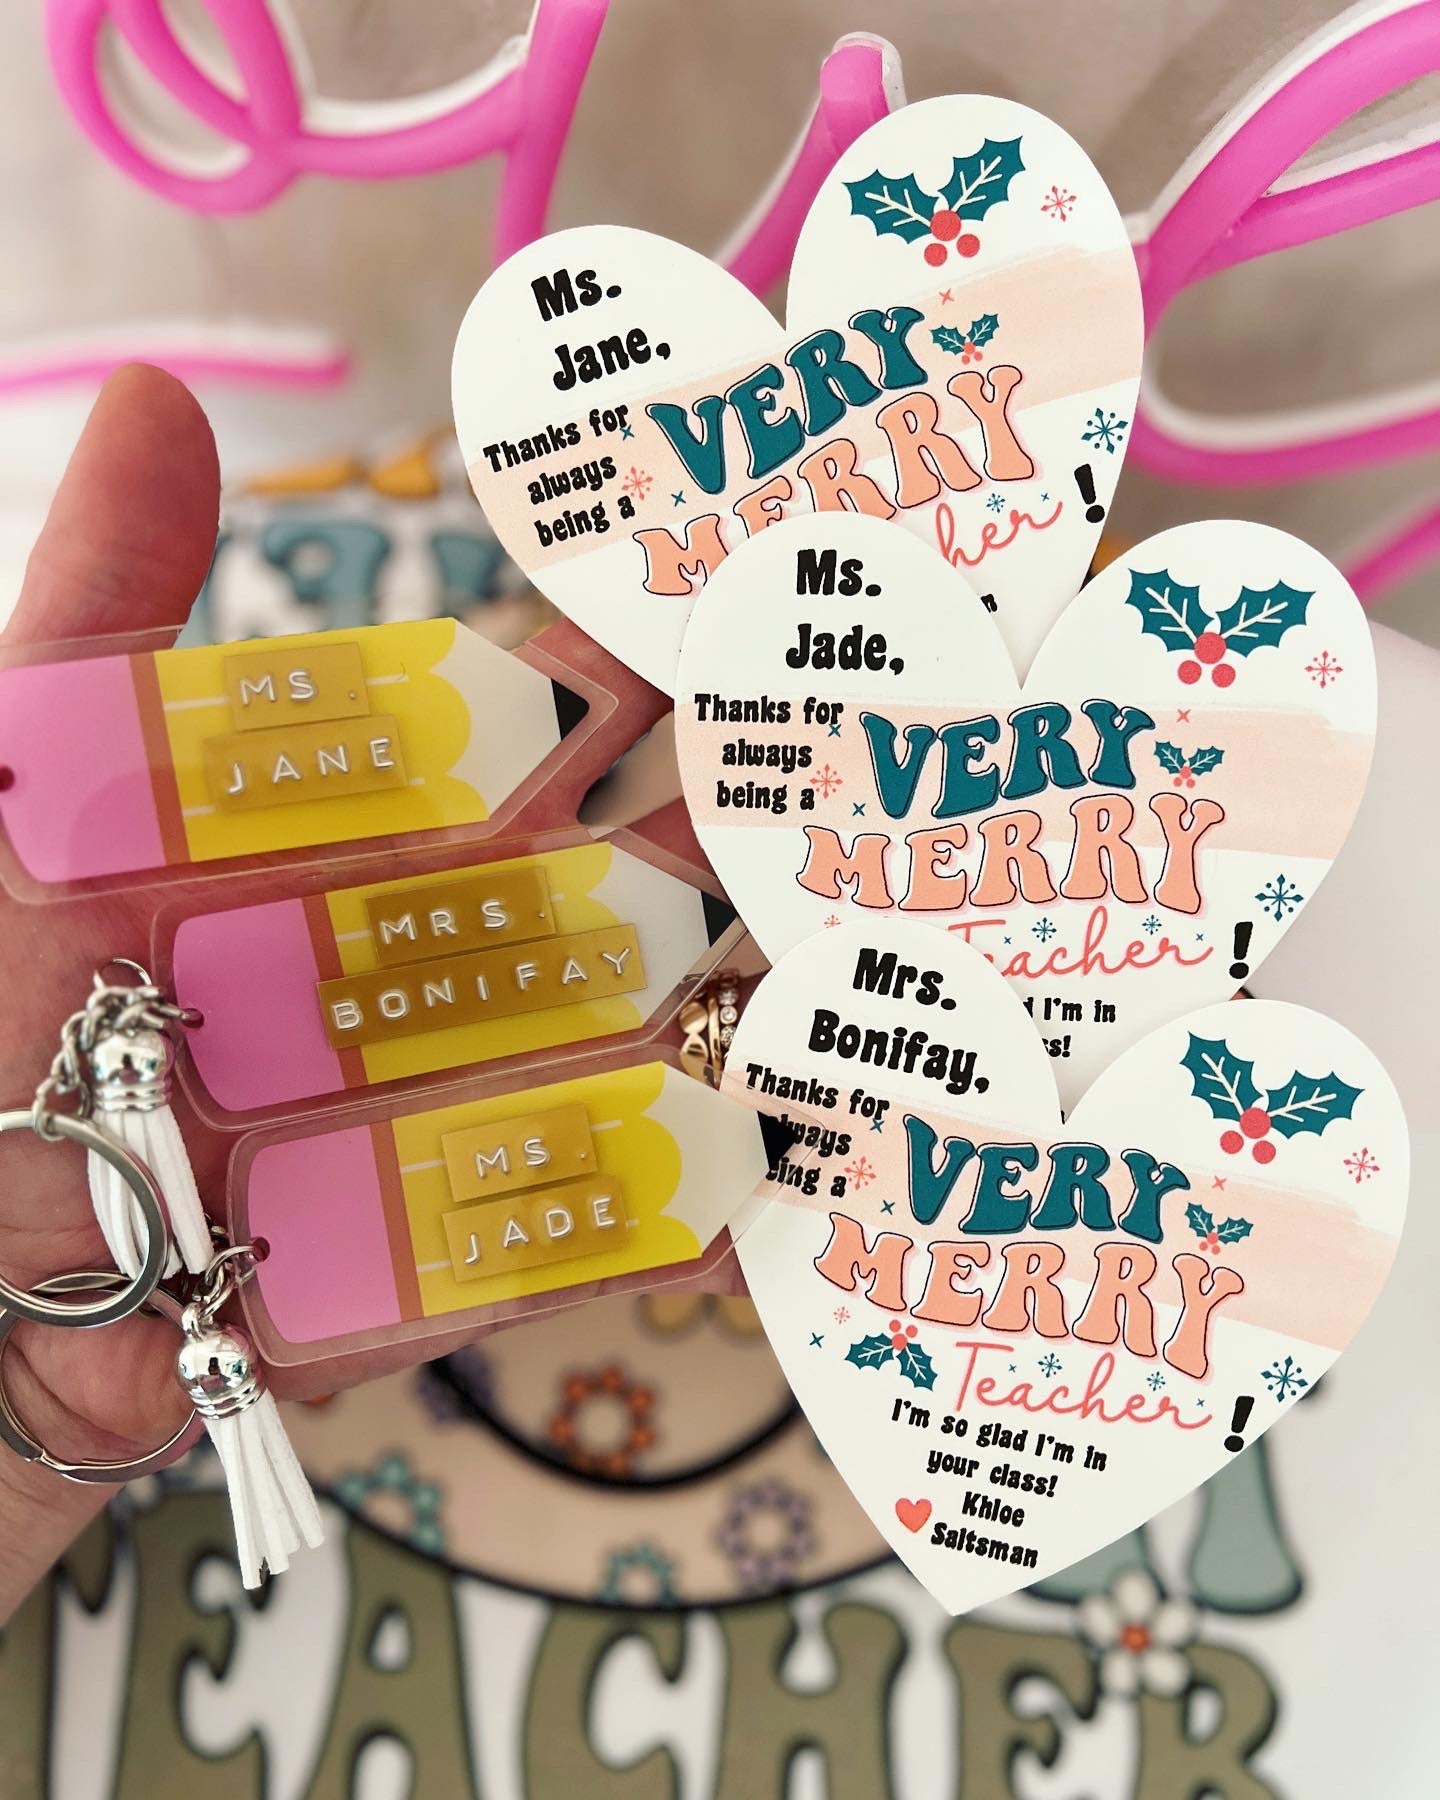 Very Merry Teacher Acrylic Pencil Classroom Key chain! Personalized Holiday gift, included with box and ribbon! Teacher Christmas gift!